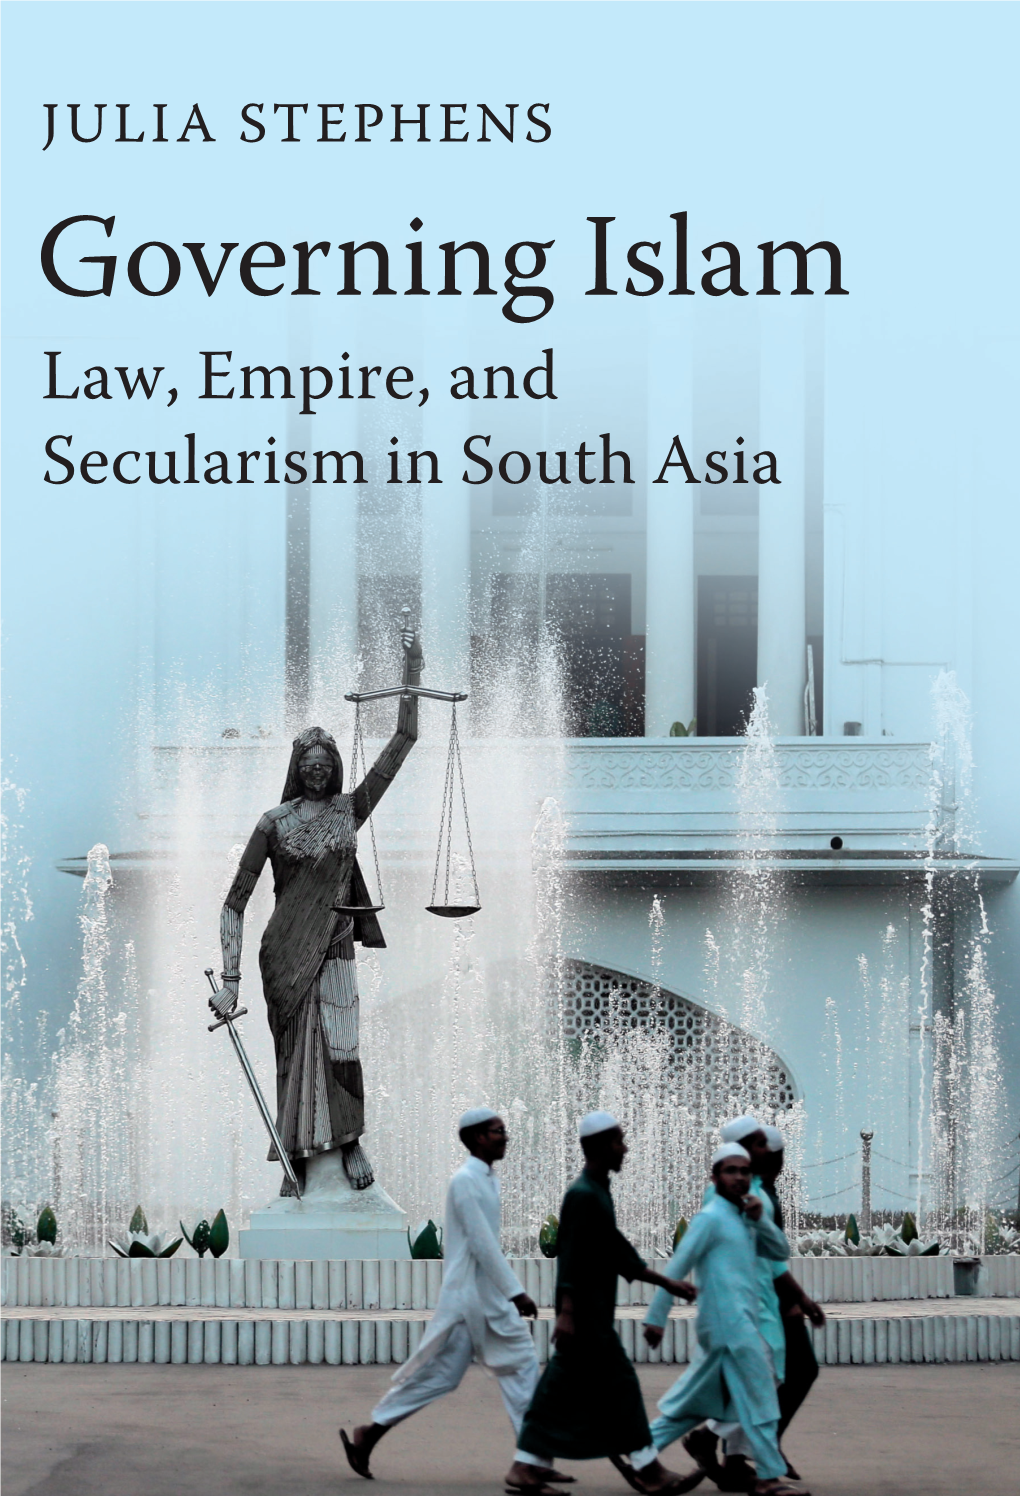 GOVERNING ISLAM PPC C M Y K Cover Designed by Hart Mcleod Ltd A.M